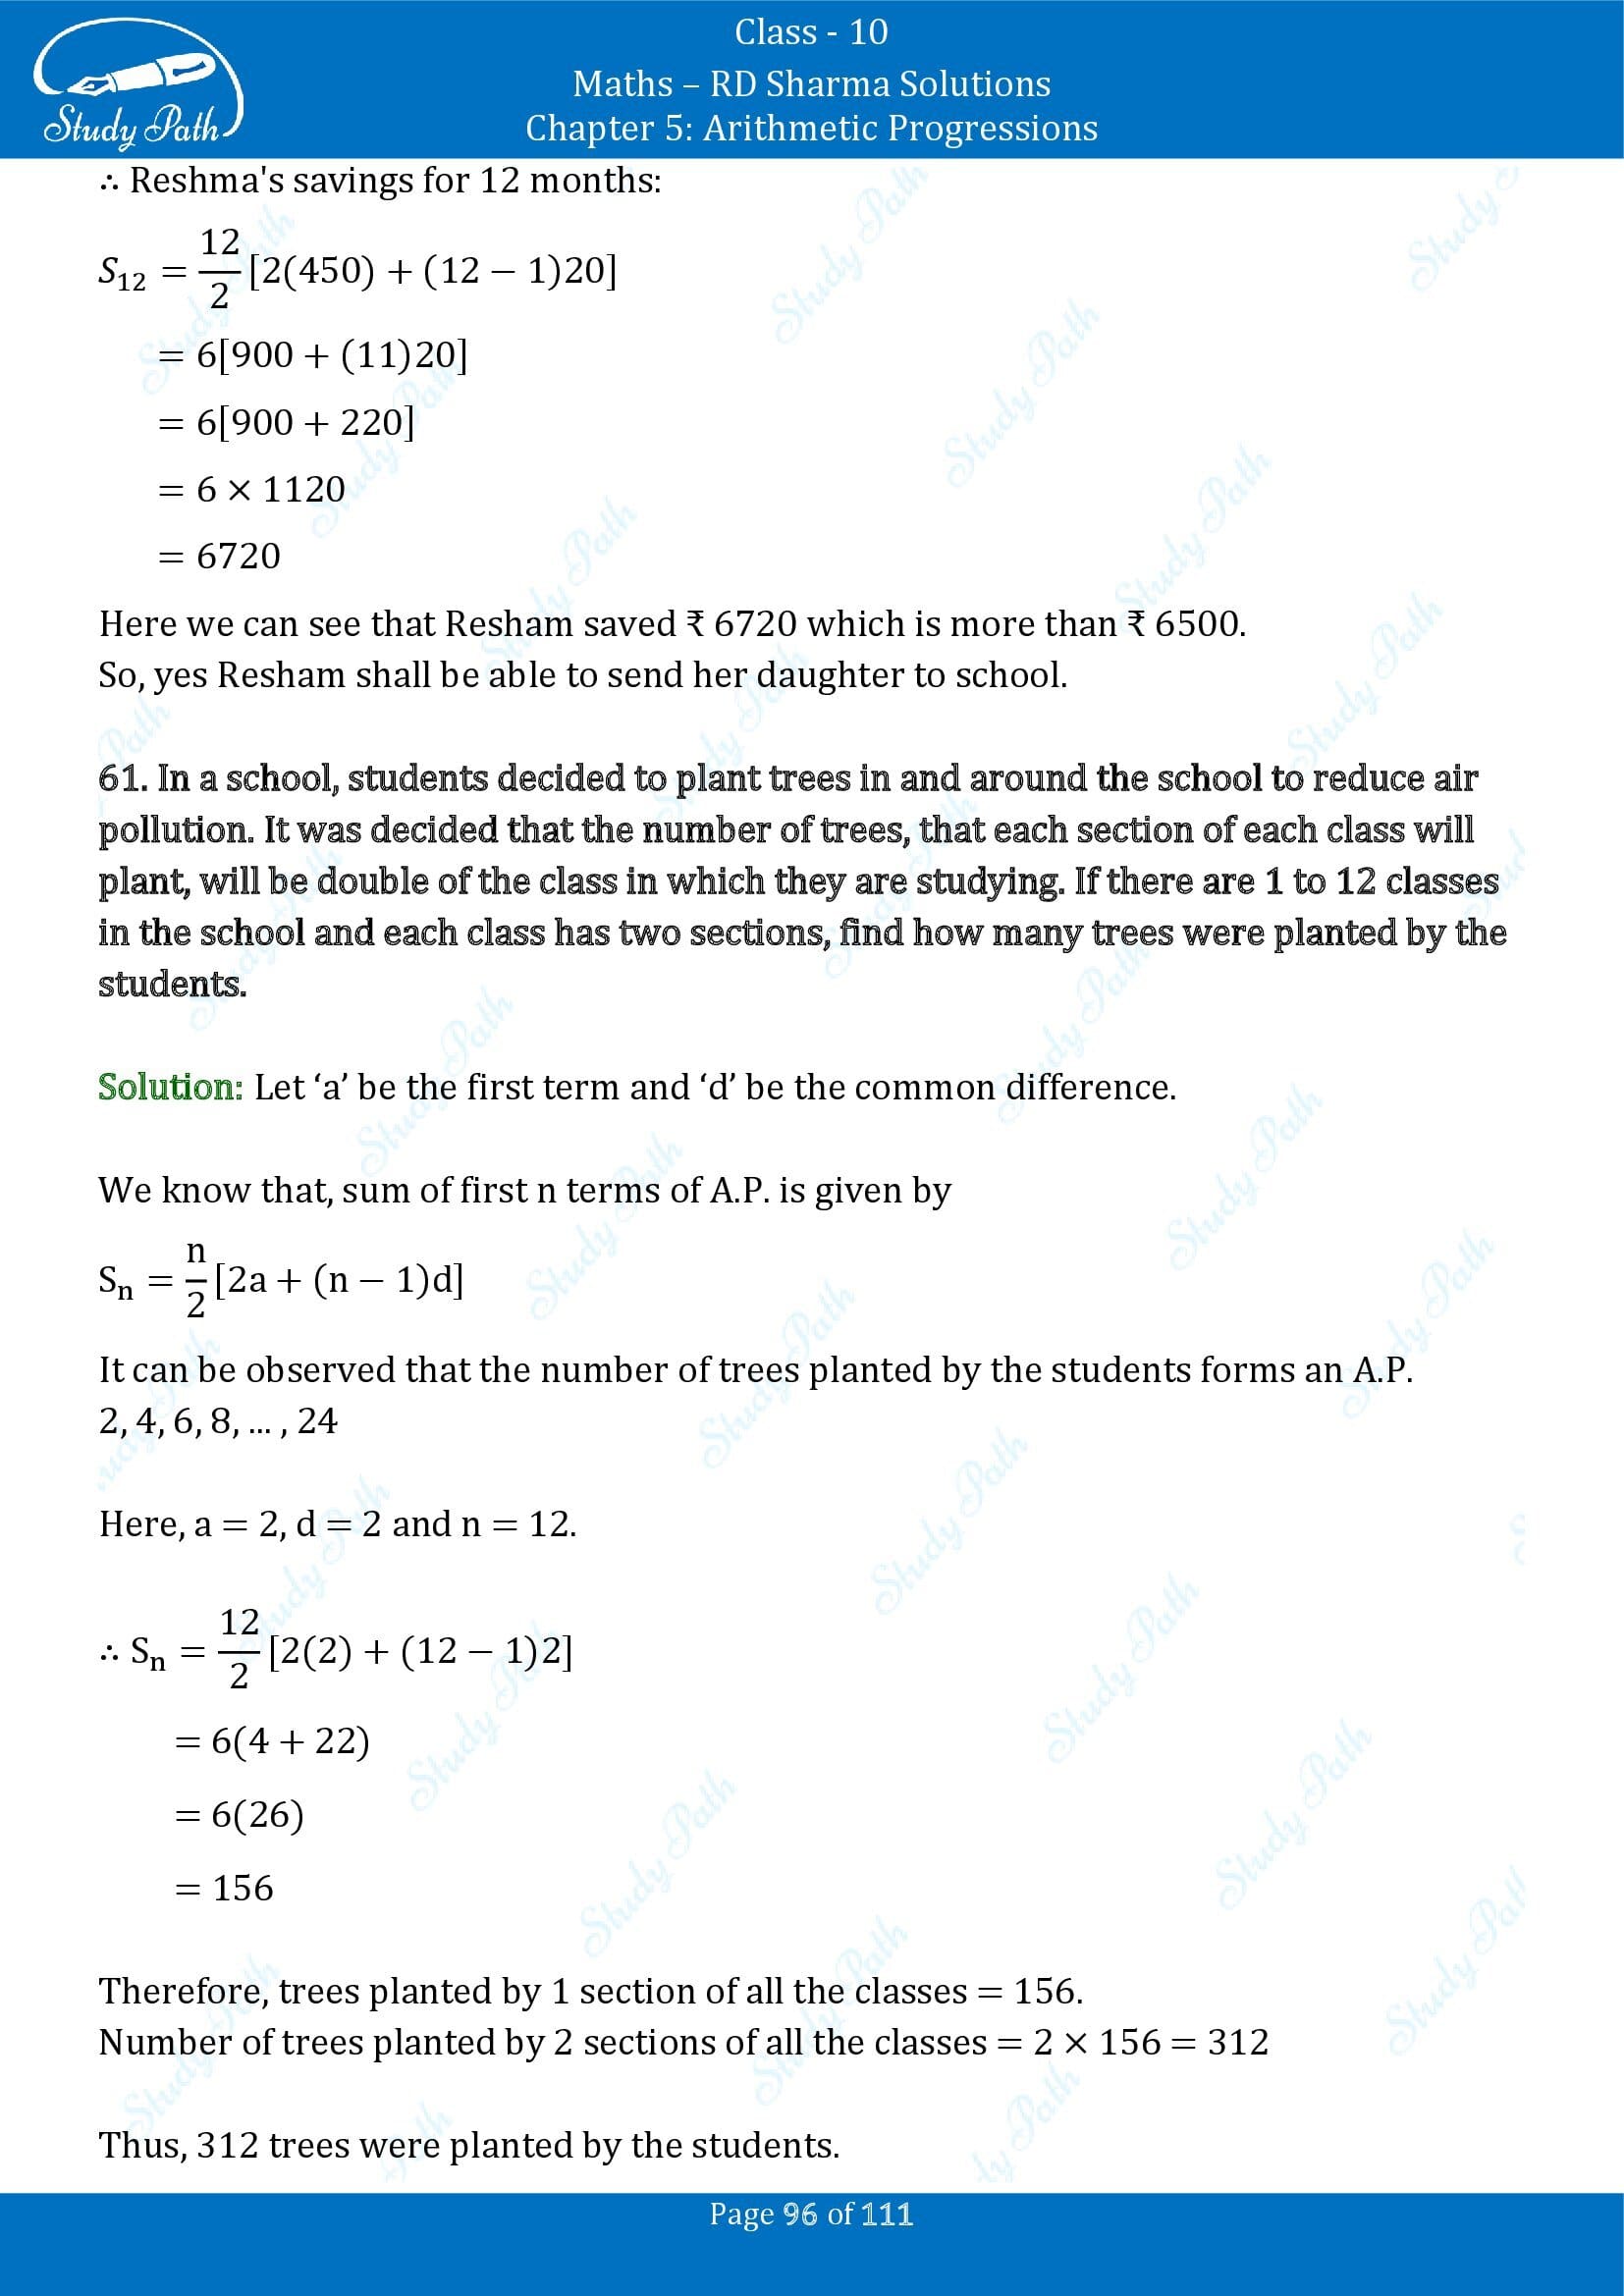 RD Sharma Solutions Class 10 Chapter 5 Arithmetic Progressions Exercise 5.6 00096